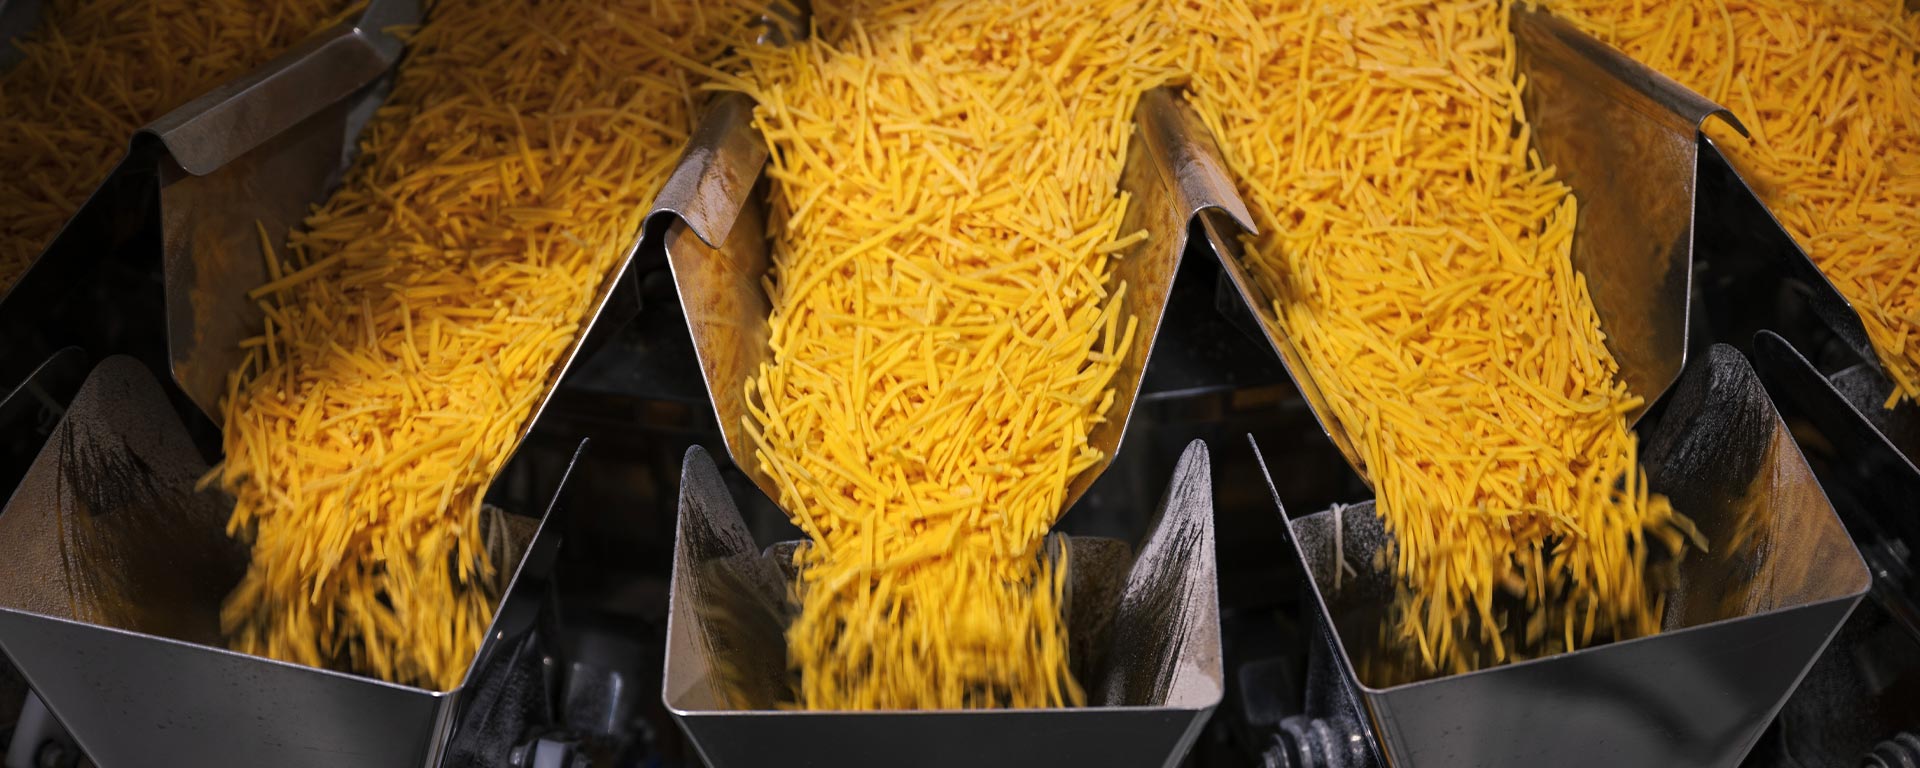 Shredded cheese being sorted during production